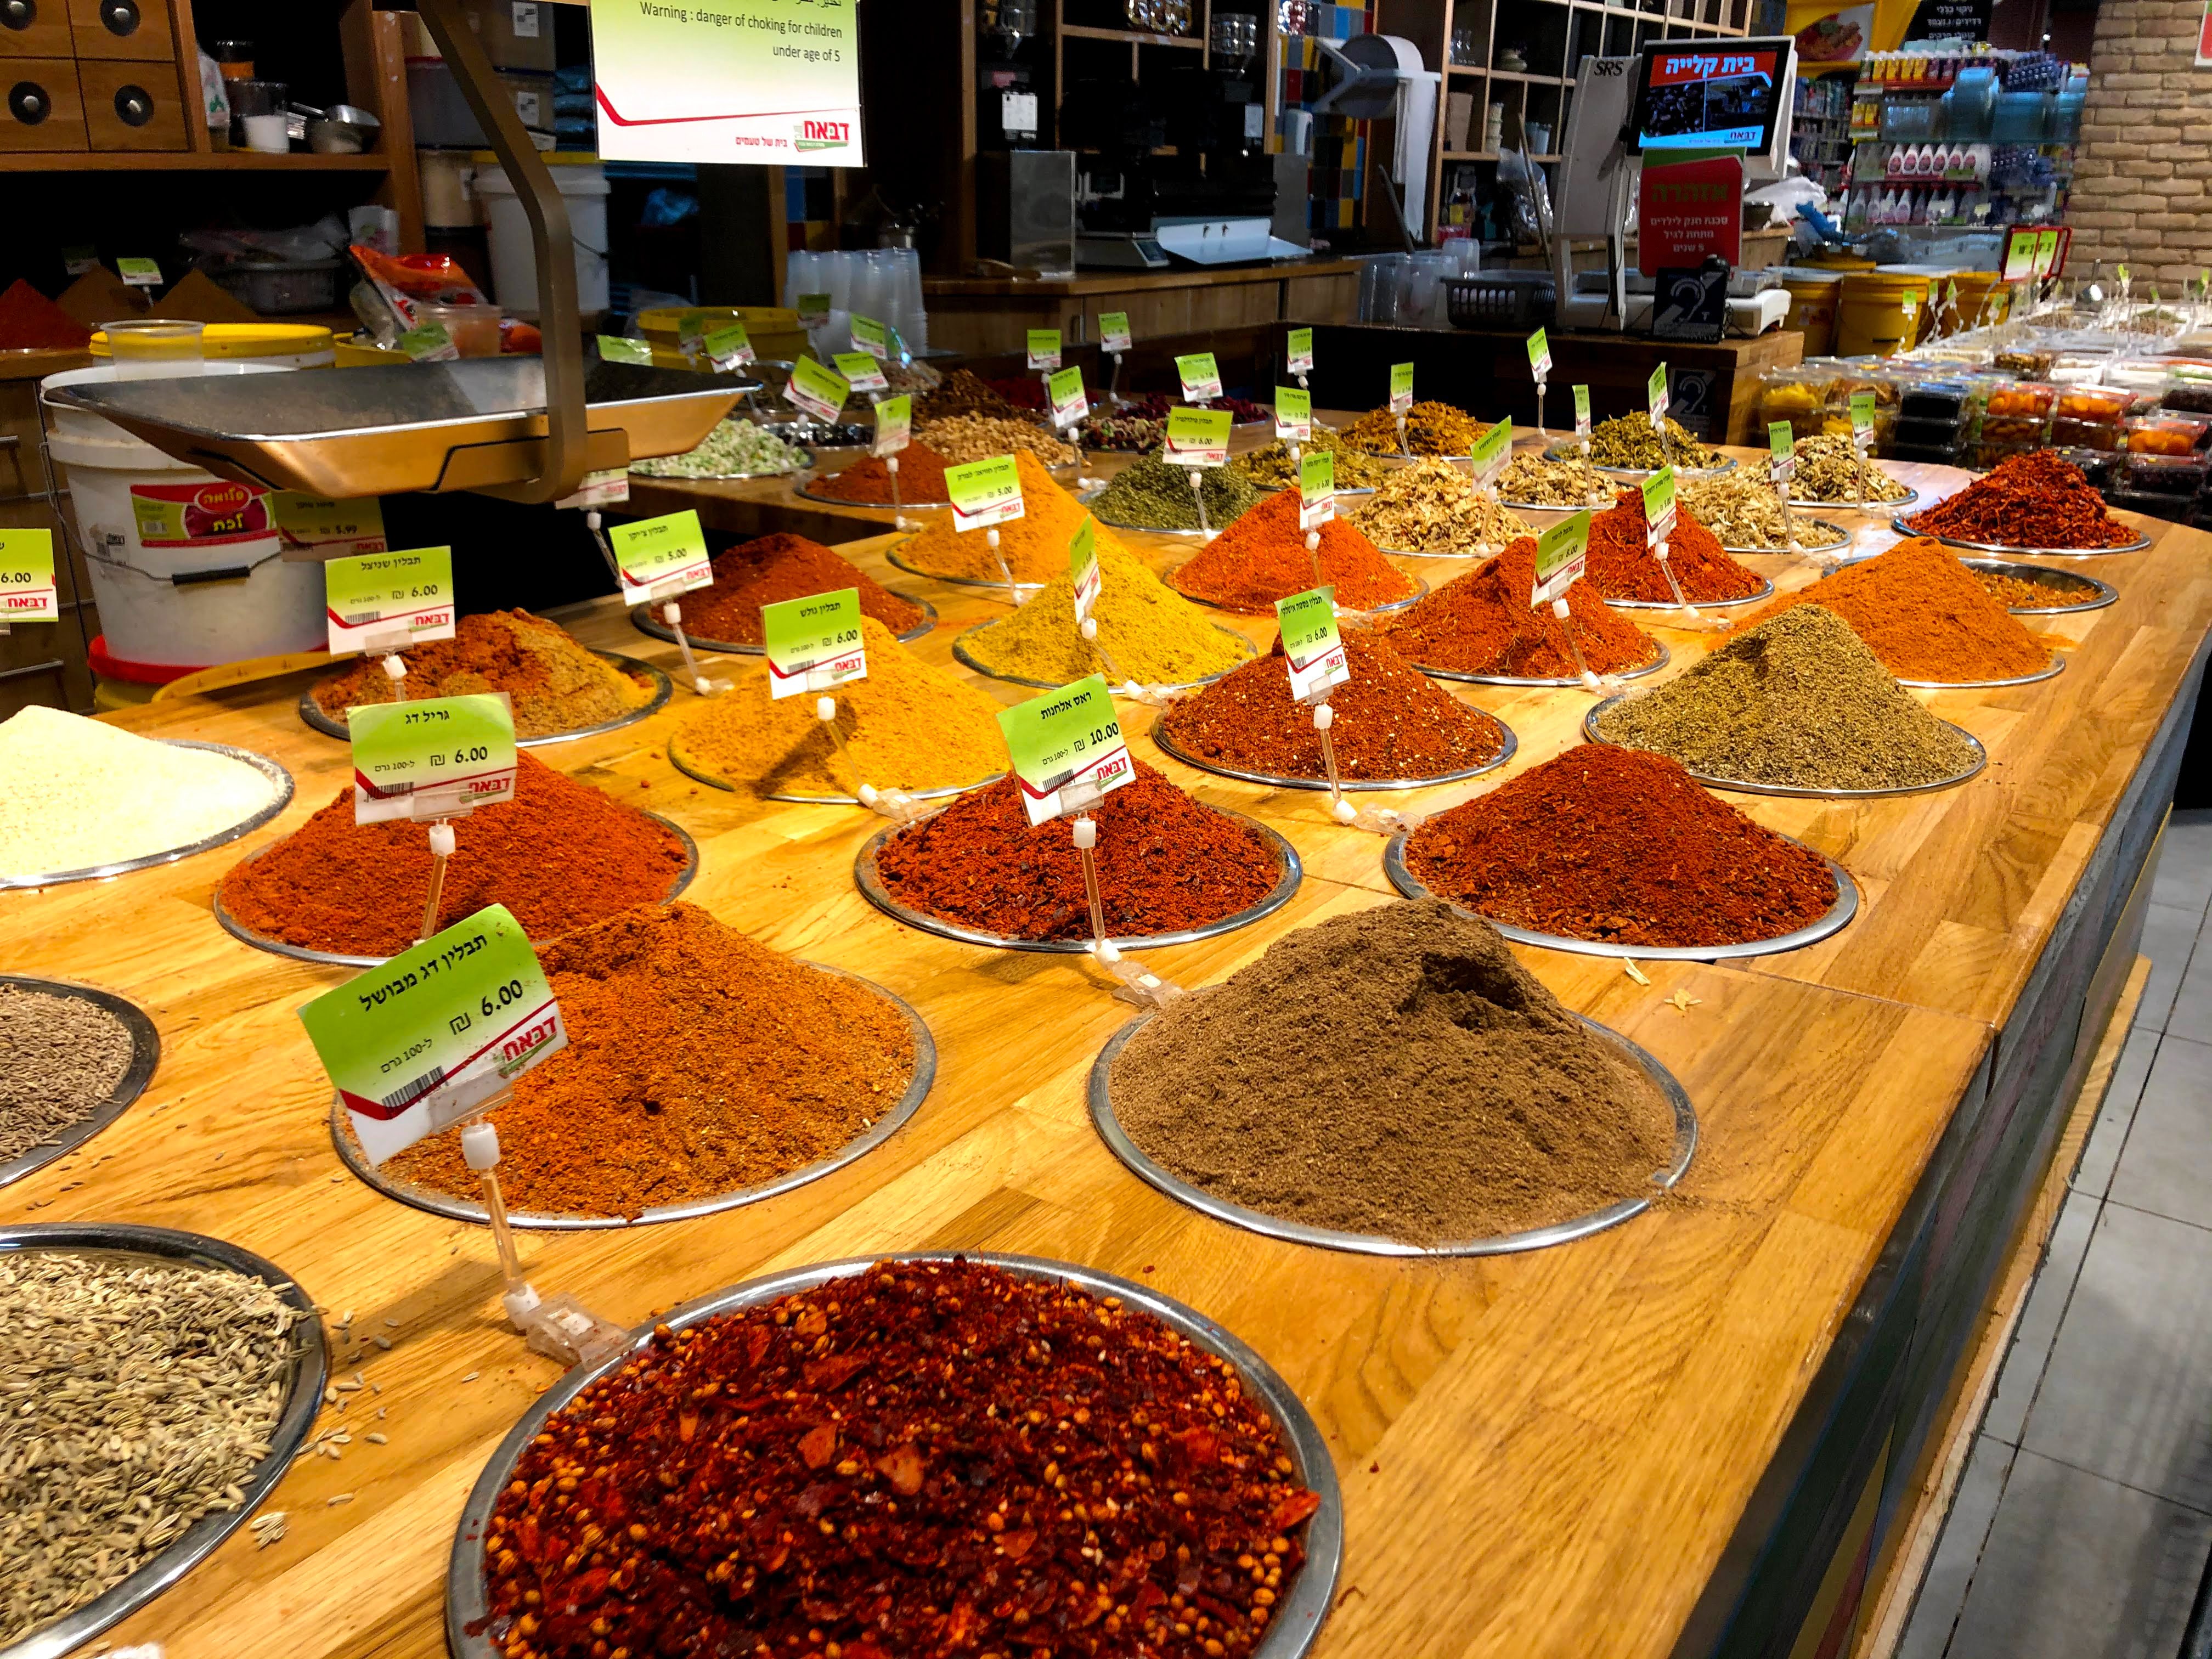 An assortment of spices for sale in an Israeli shop